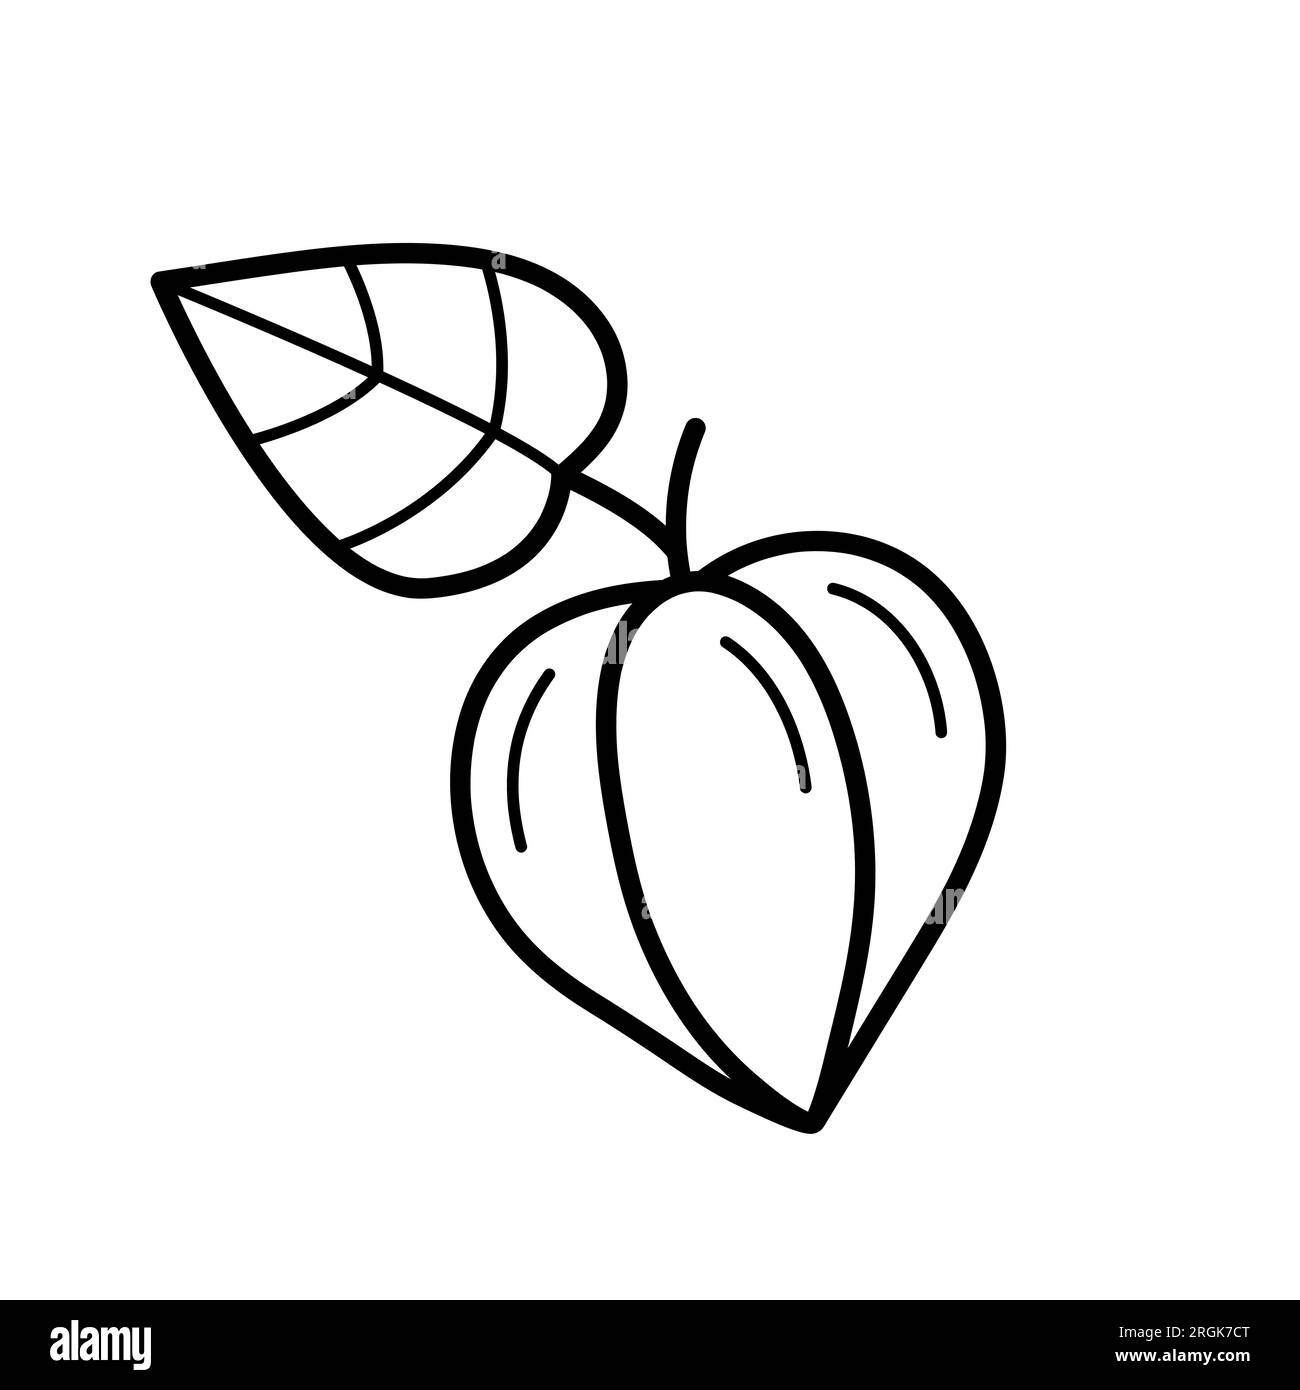 Closed physalis flower. Autumn botanical element. Doodle sketch scribble style. Vector illustration isolated on white background. Stock Vector